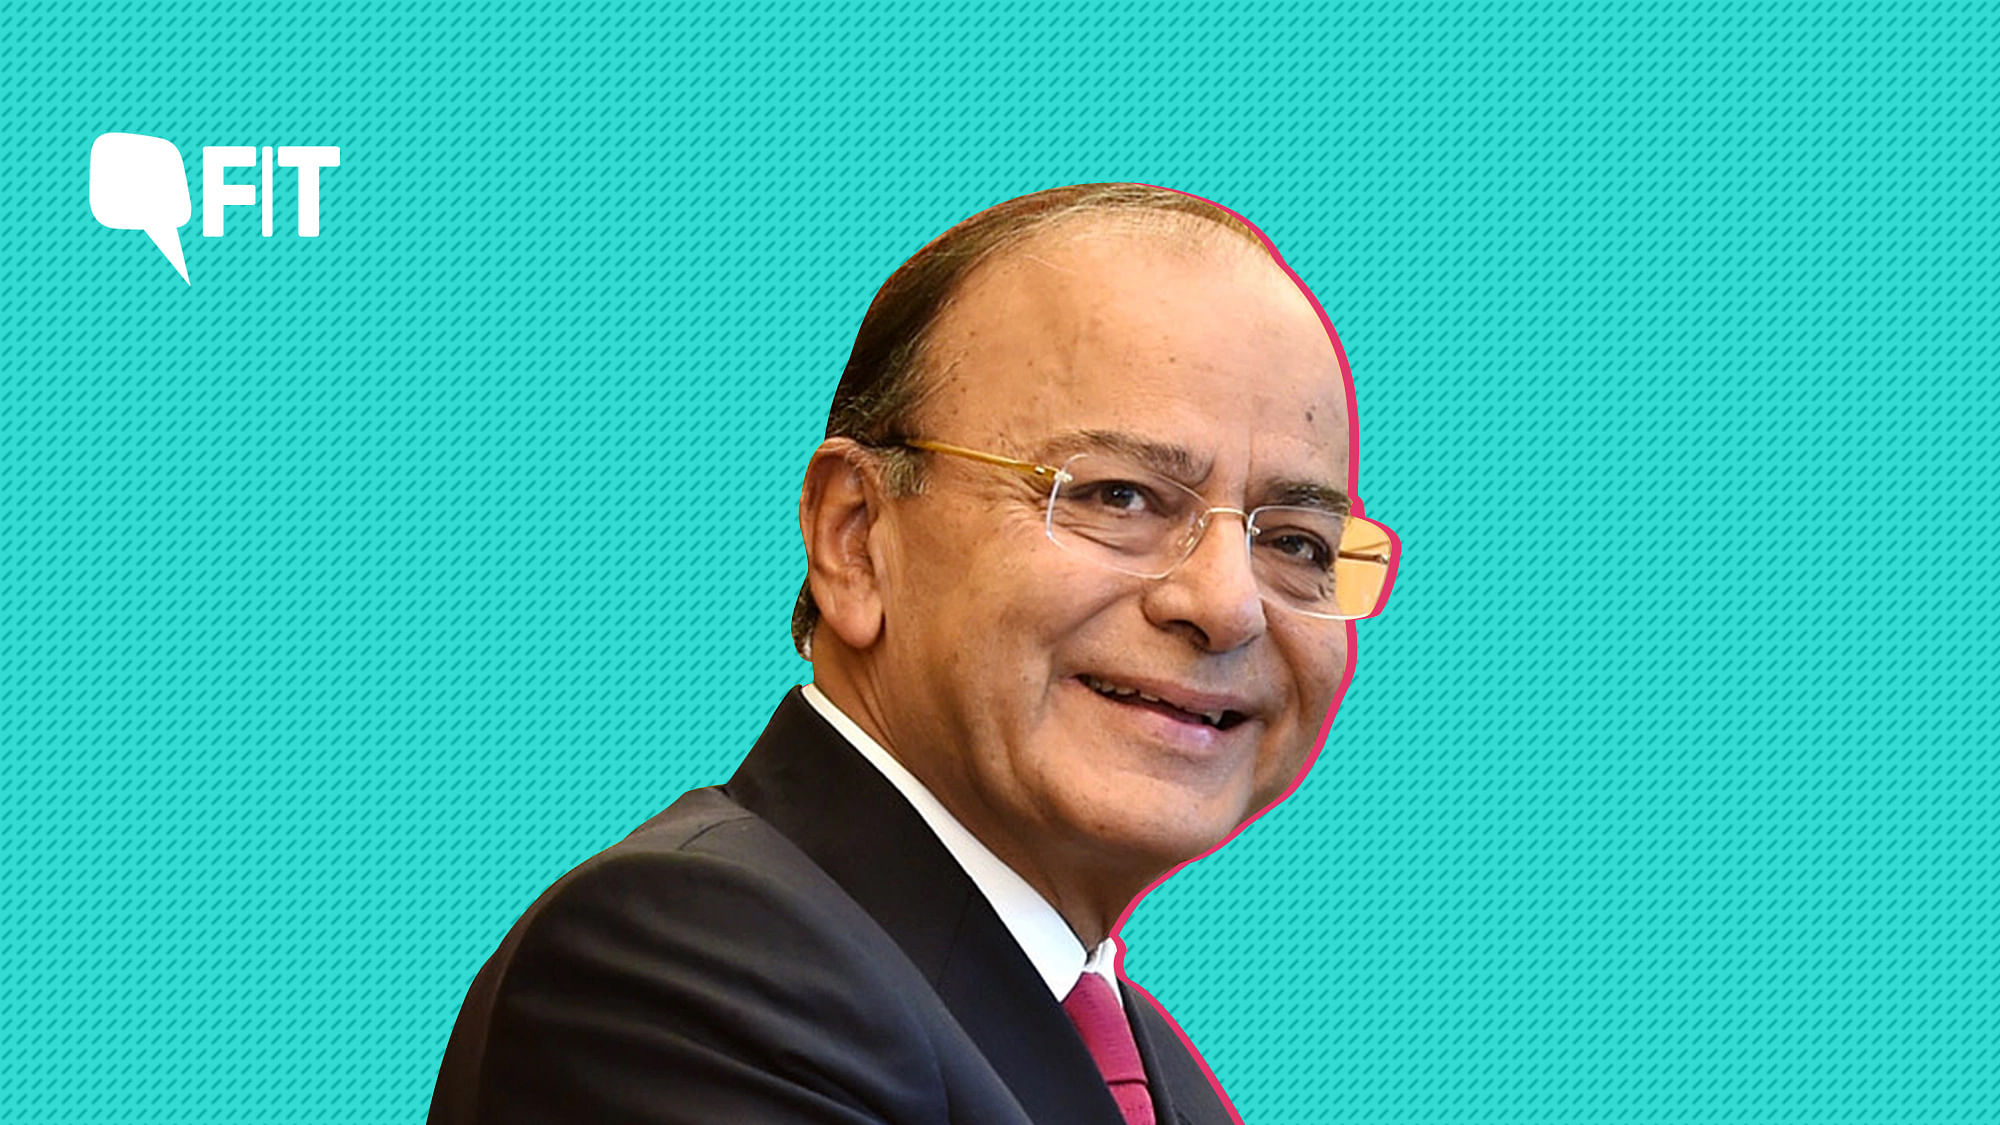 Former Finance Minister Arun Jaitley passed away on 24 August 2019. He had been battling various health ailments for years.